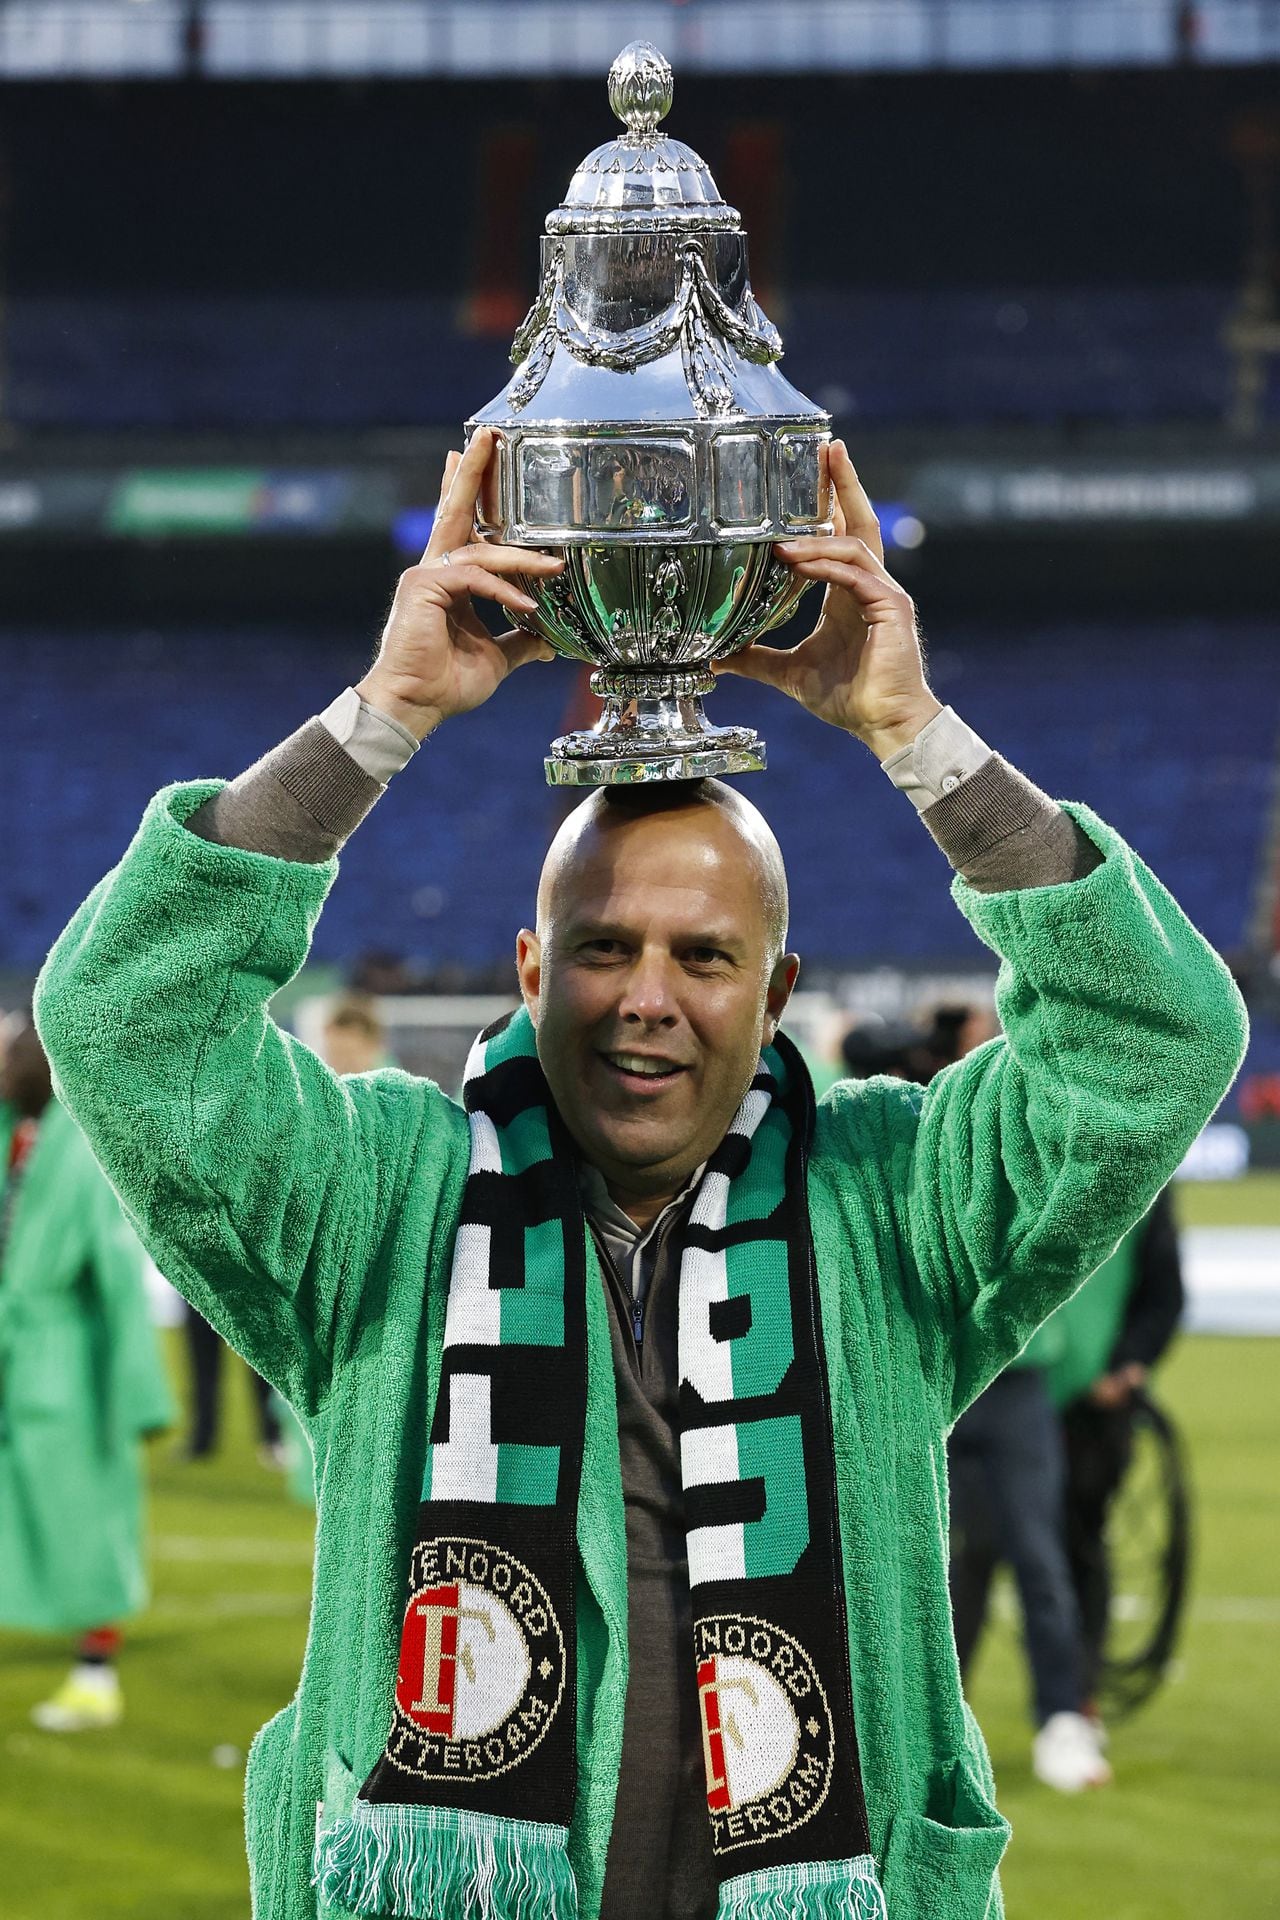 Feyenoord's Dutch head coach Arne Slot celebrates Feyenoord's victory with the KNVB cup after the Dutch KNVB Cup Final match between Feyenoord and NEC Nijmegen at Feyenoord Stadium de Kuip in Rotterdam on April 21, 2024. (Photo by MAURICE VAN STEEN / ANP / AFP) / Netherlands OUT